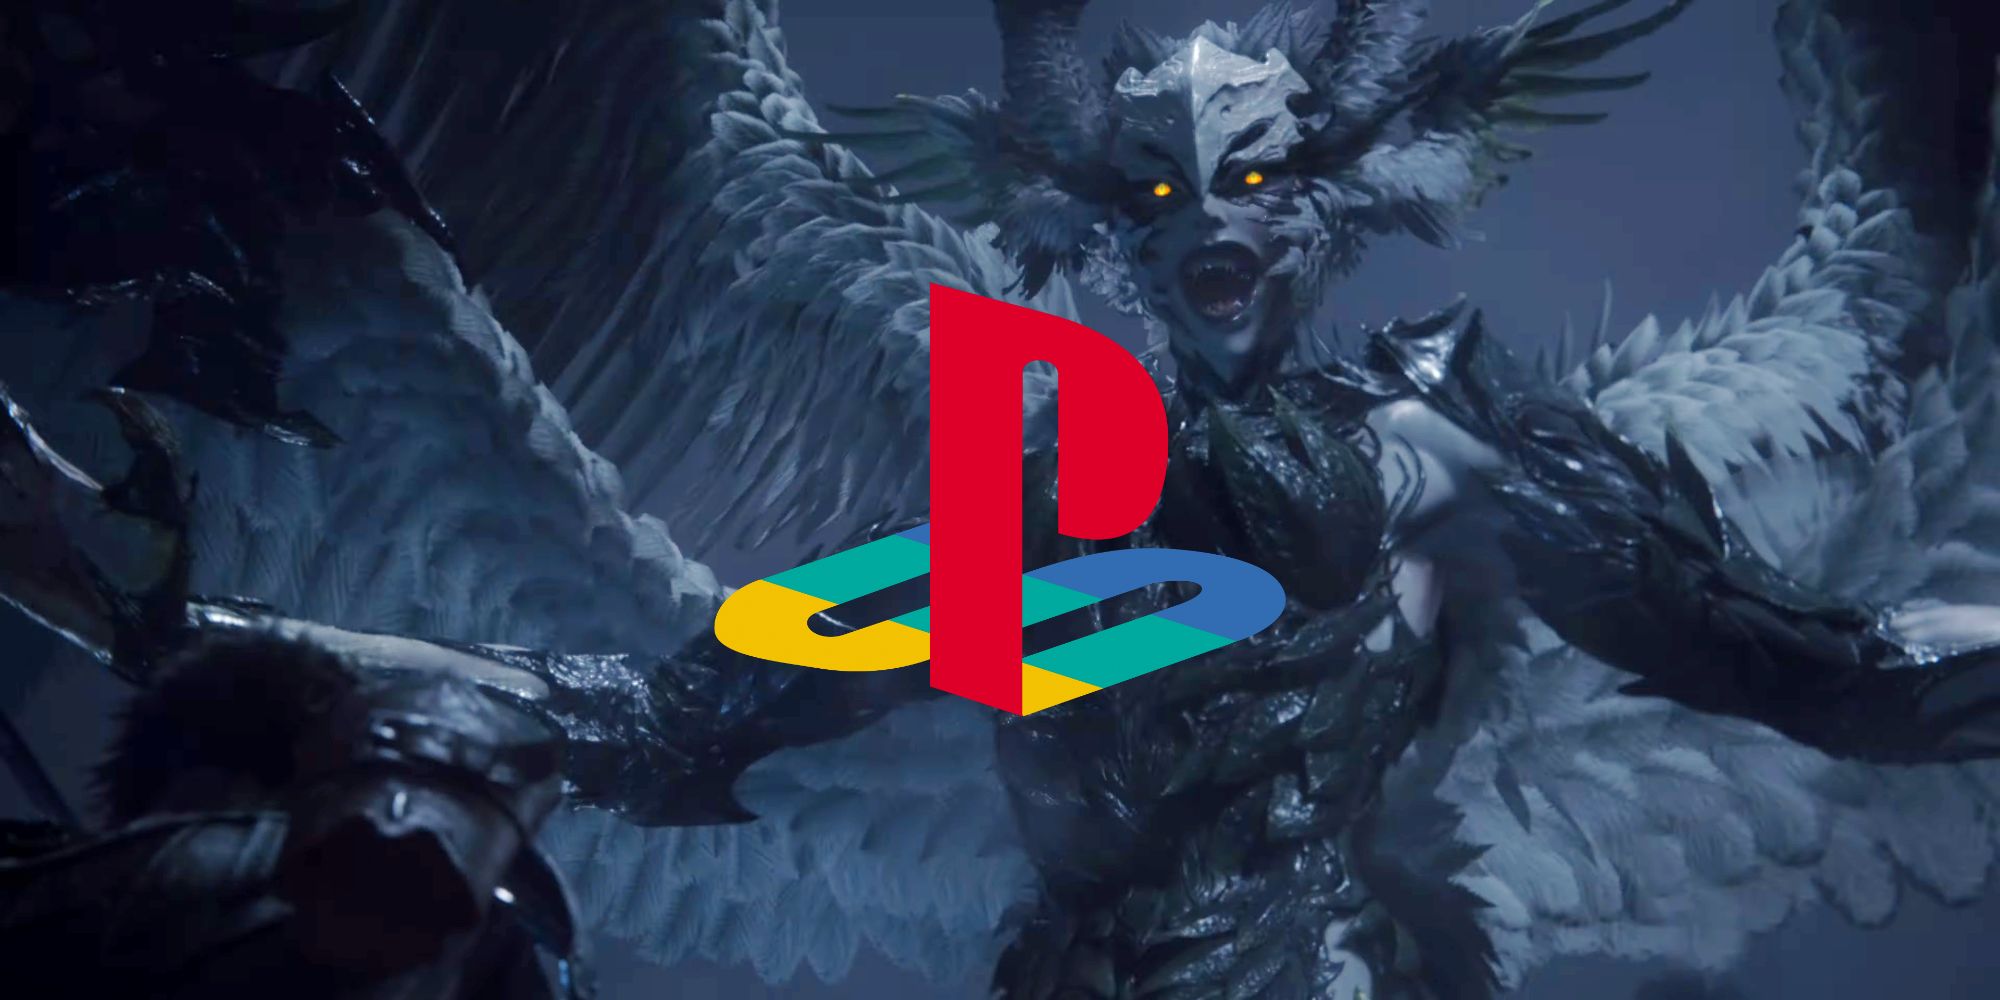 Watch the PlayStation State of Play June 2022 showcase here